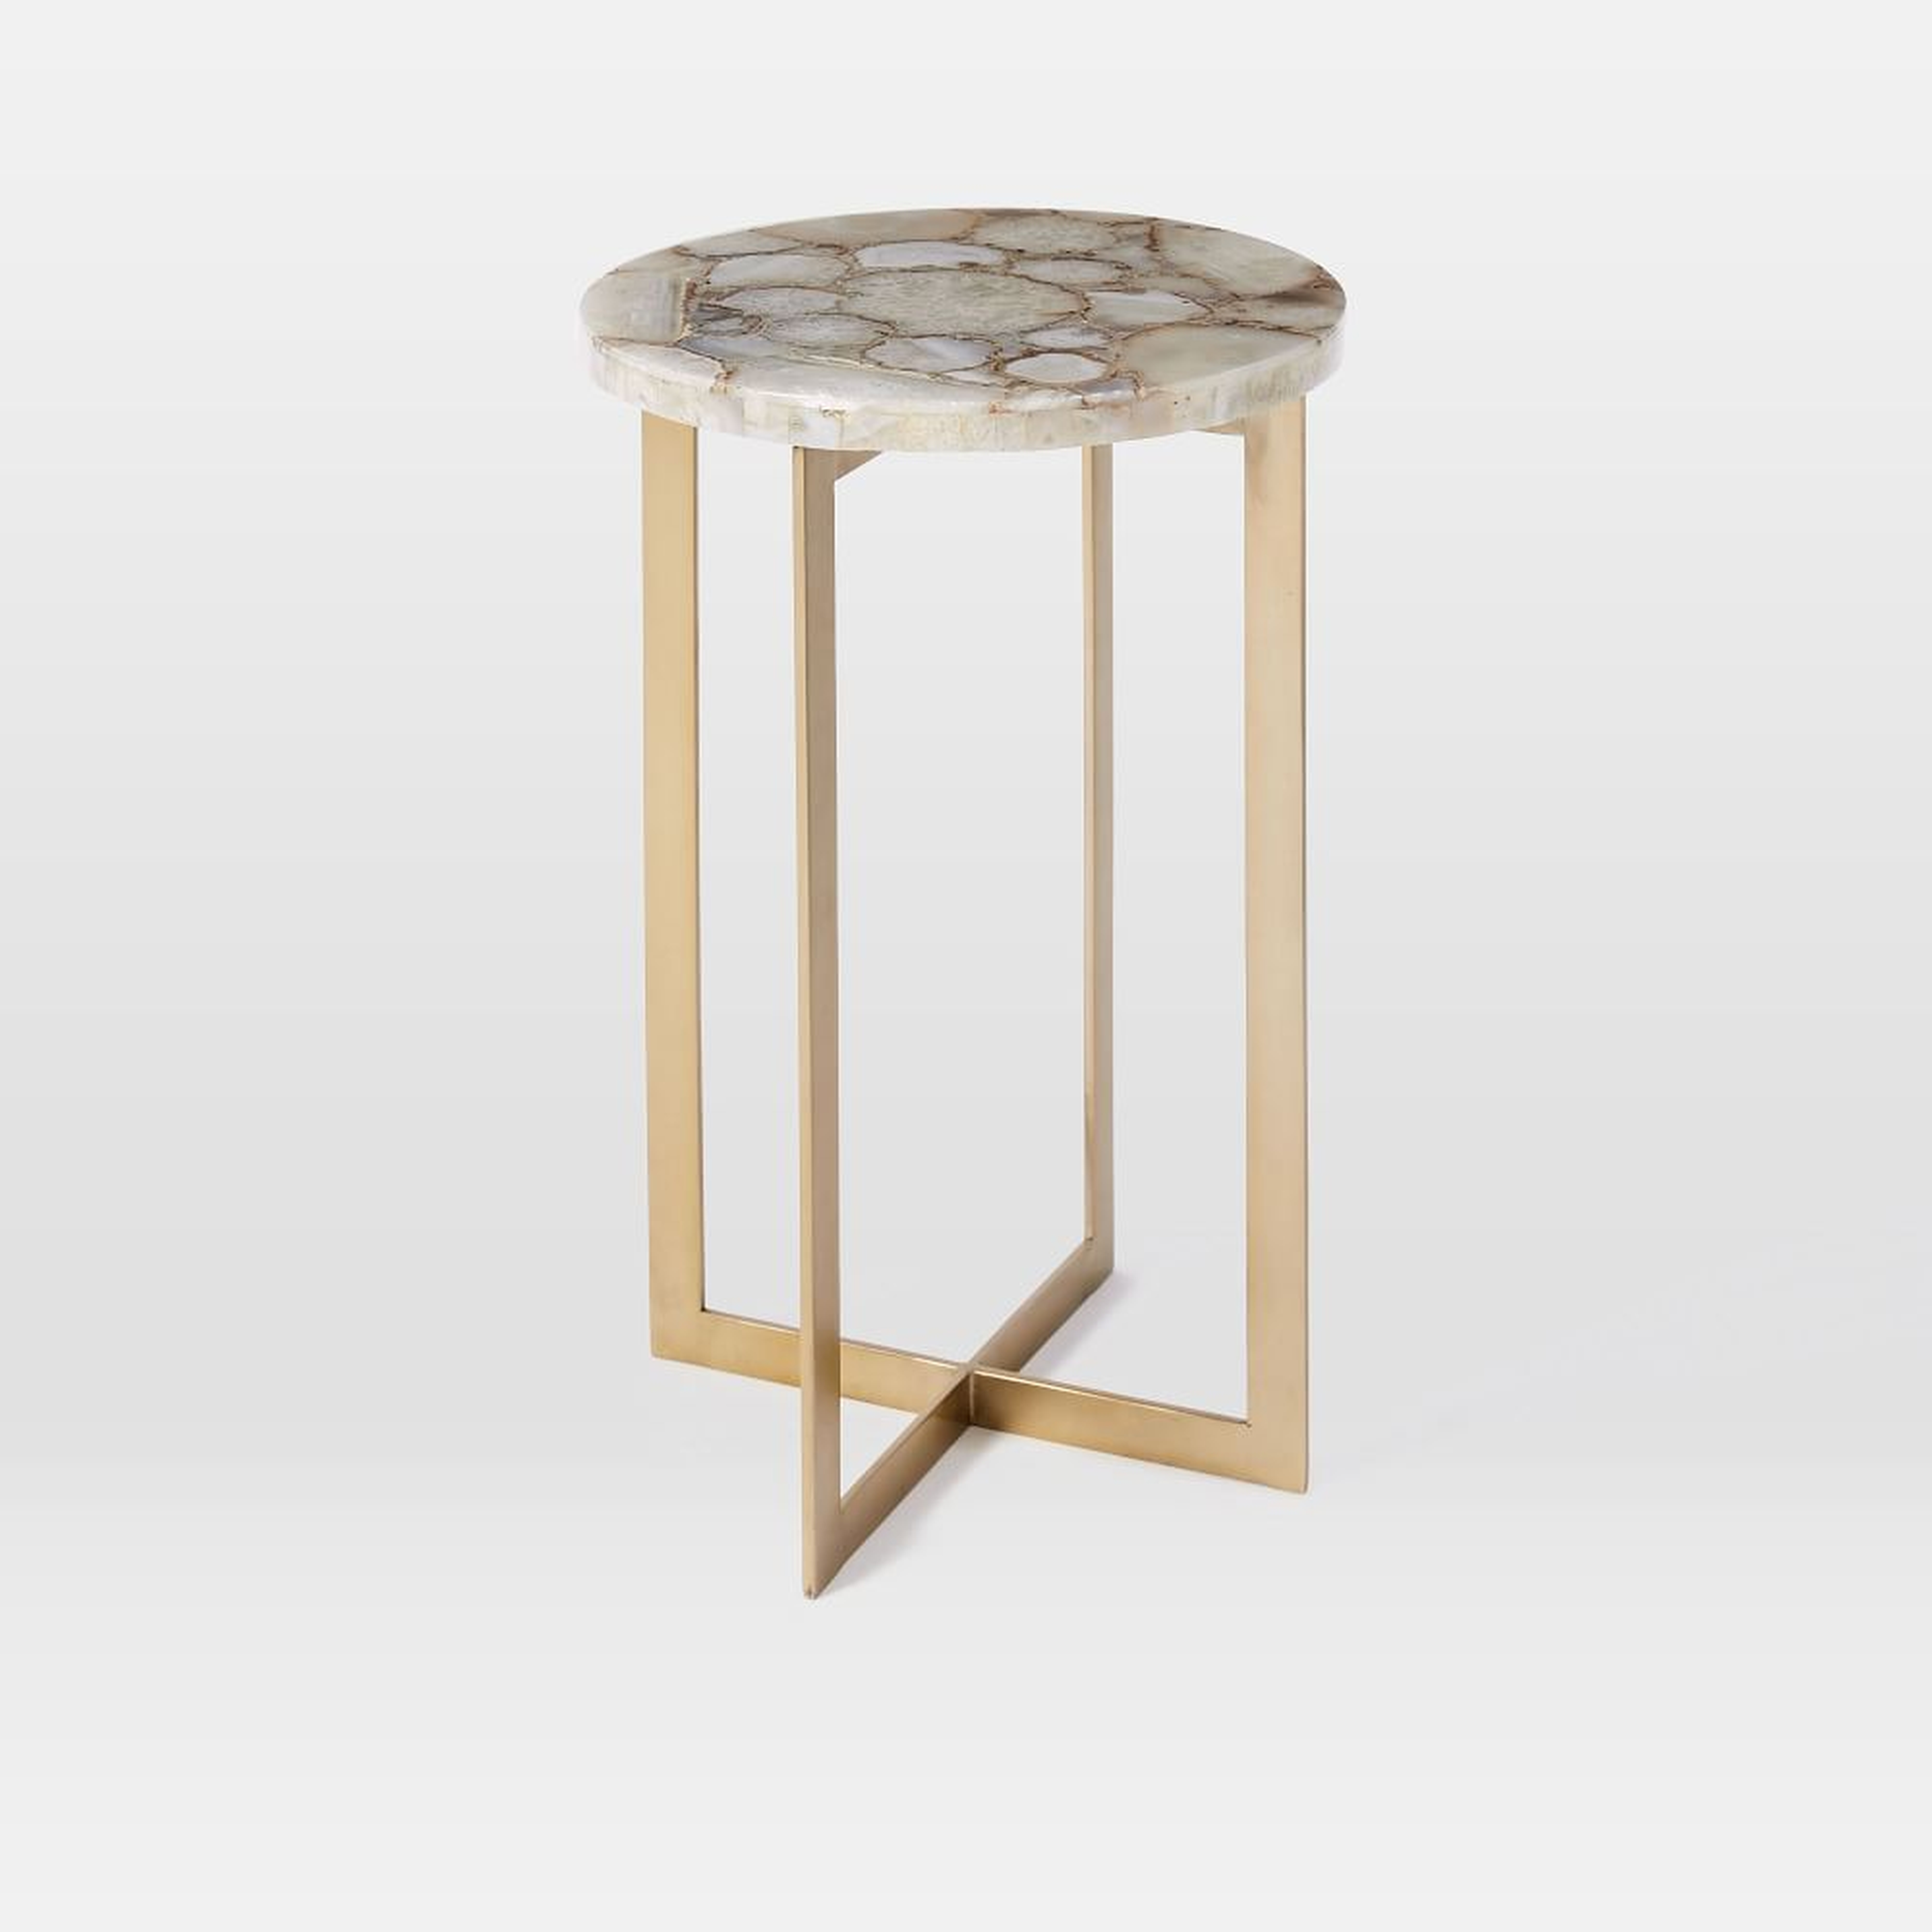 Agate 13" Side Table, Natural Agate, Antique Brass - West Elm